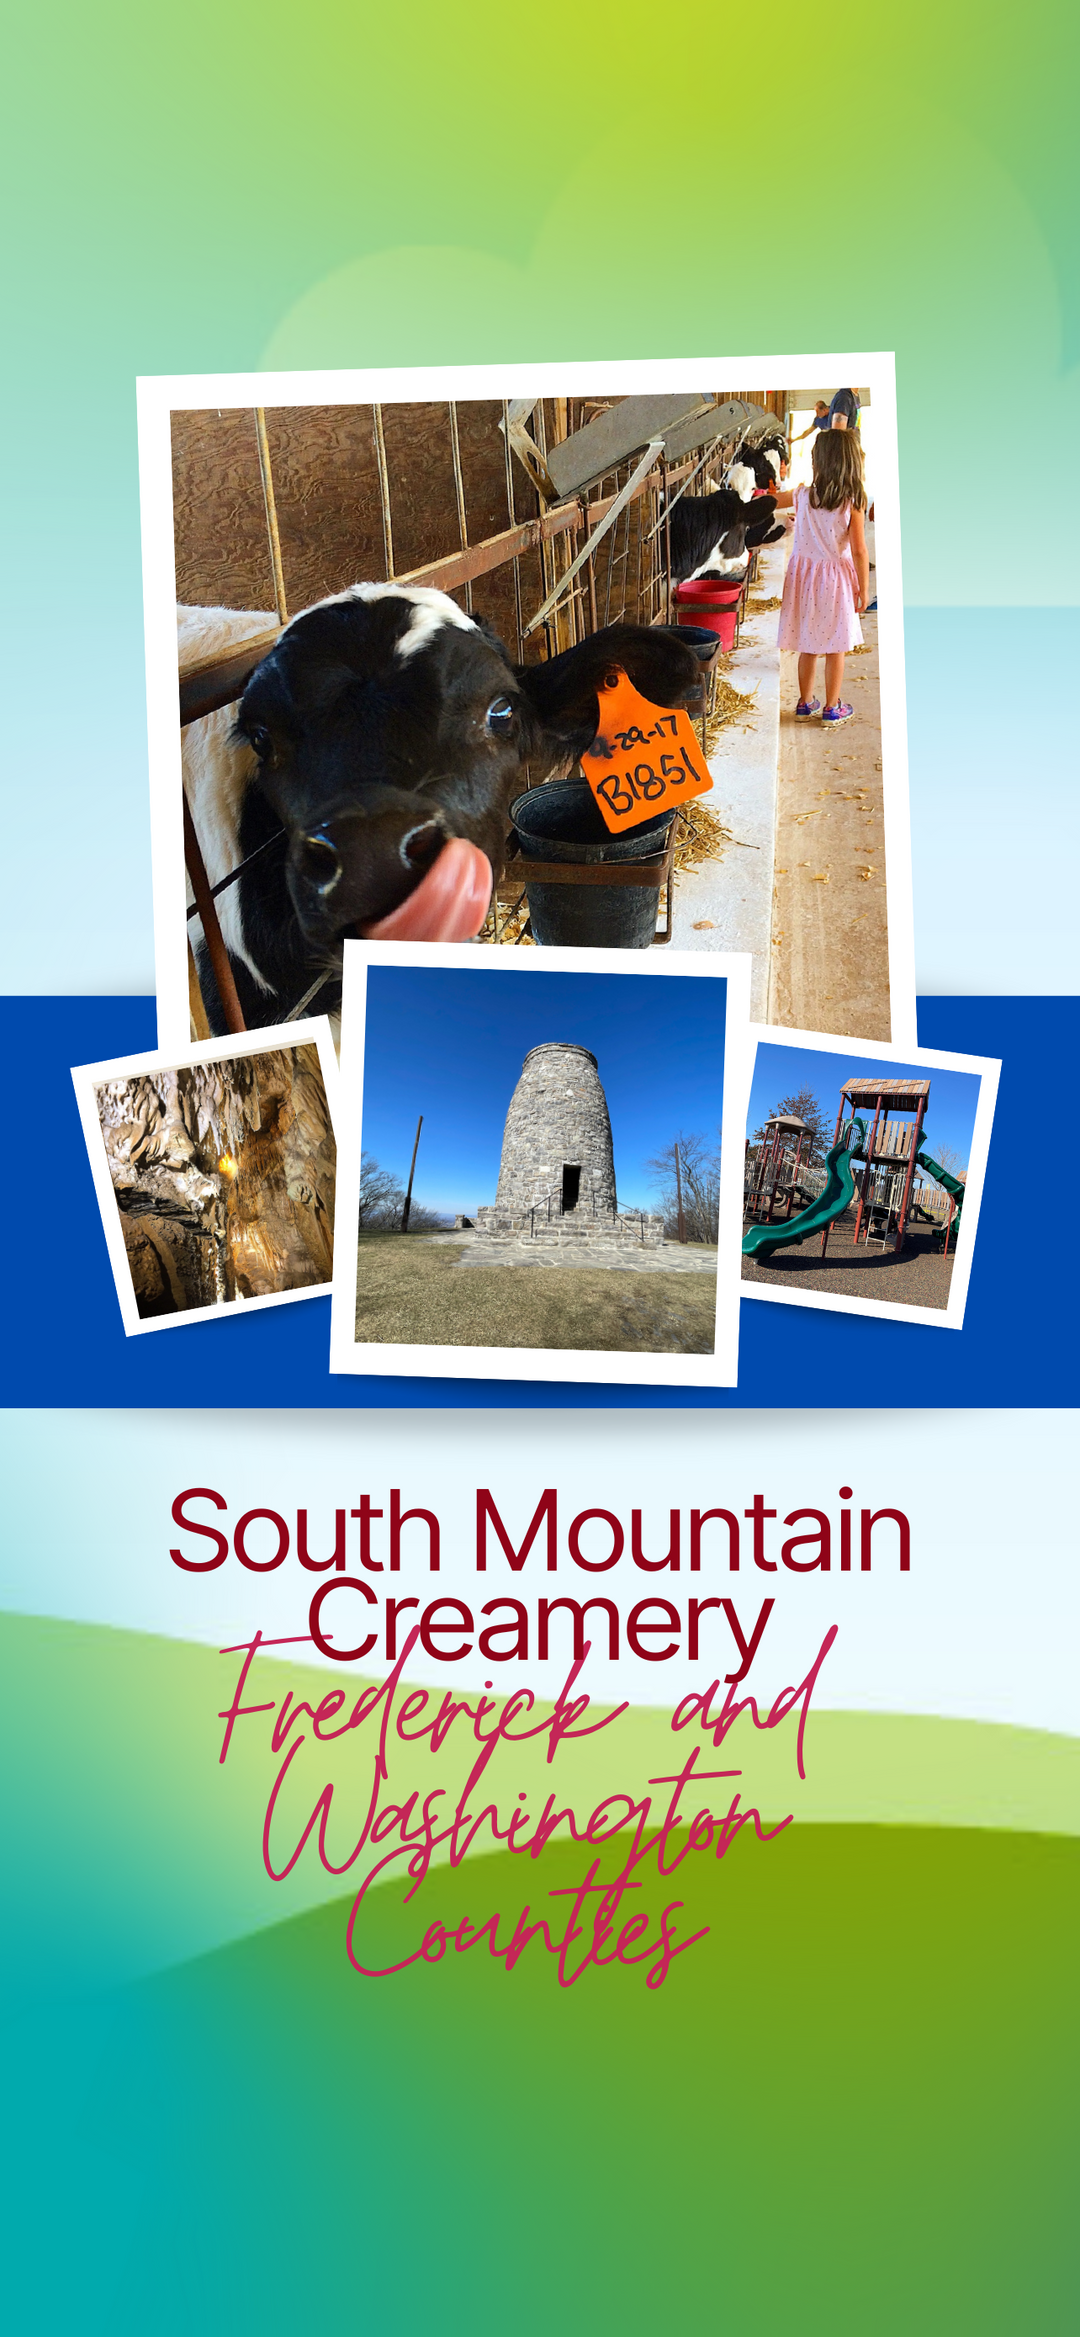 South Mountain Creamery Day Trip Itinerary